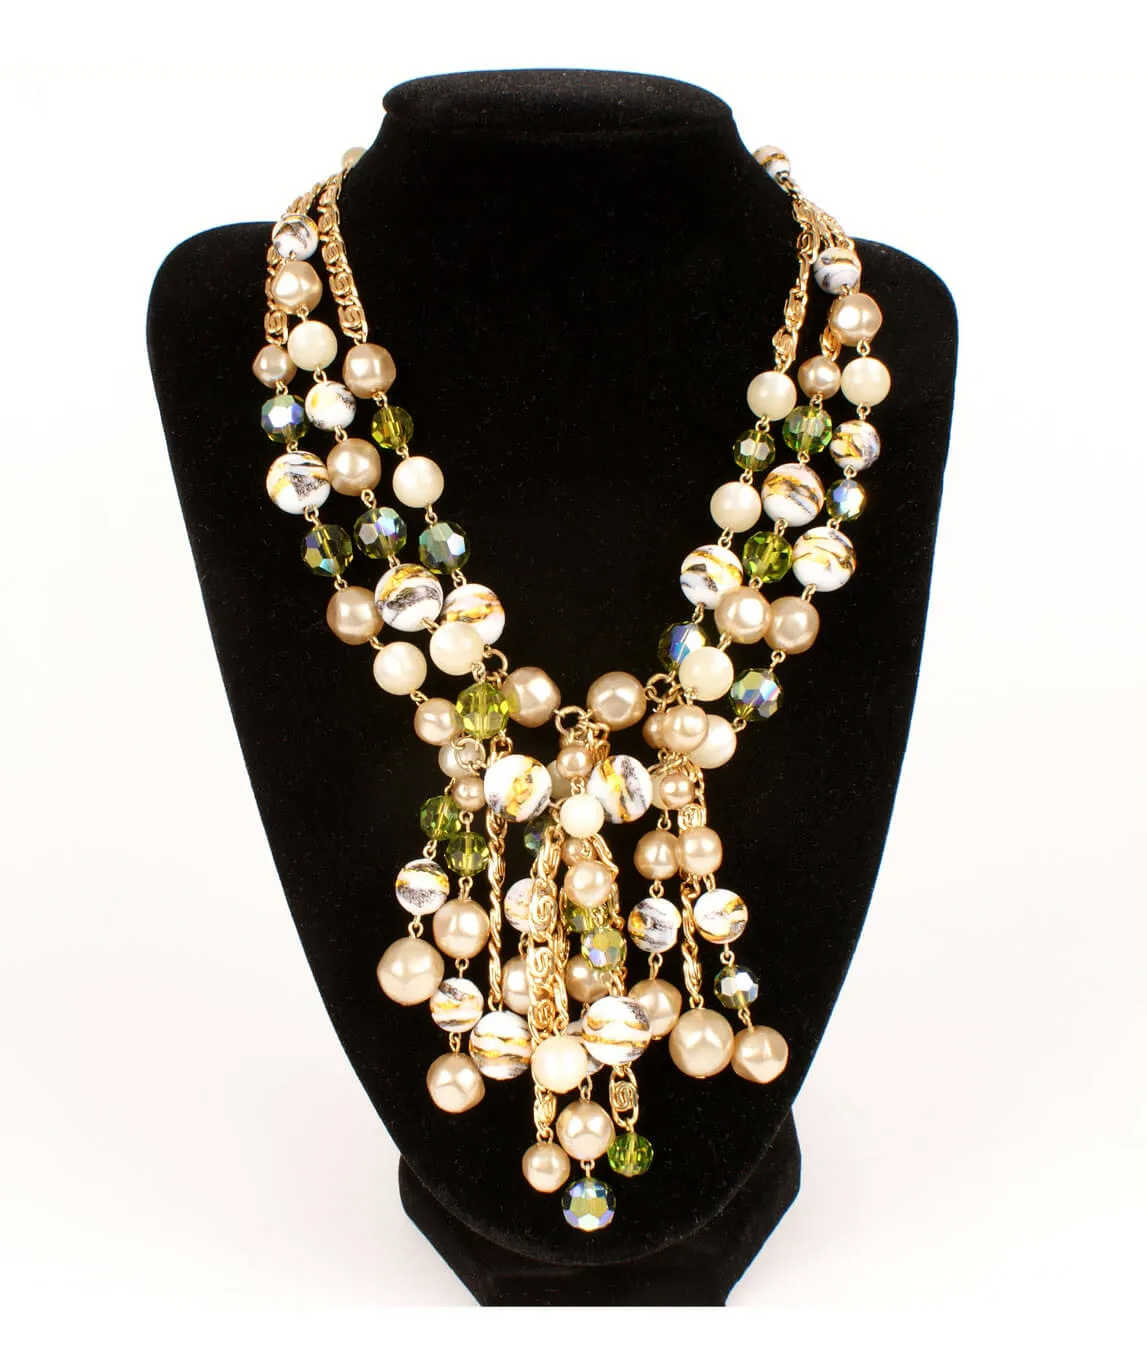 Christian Dior vintage beaded necklace